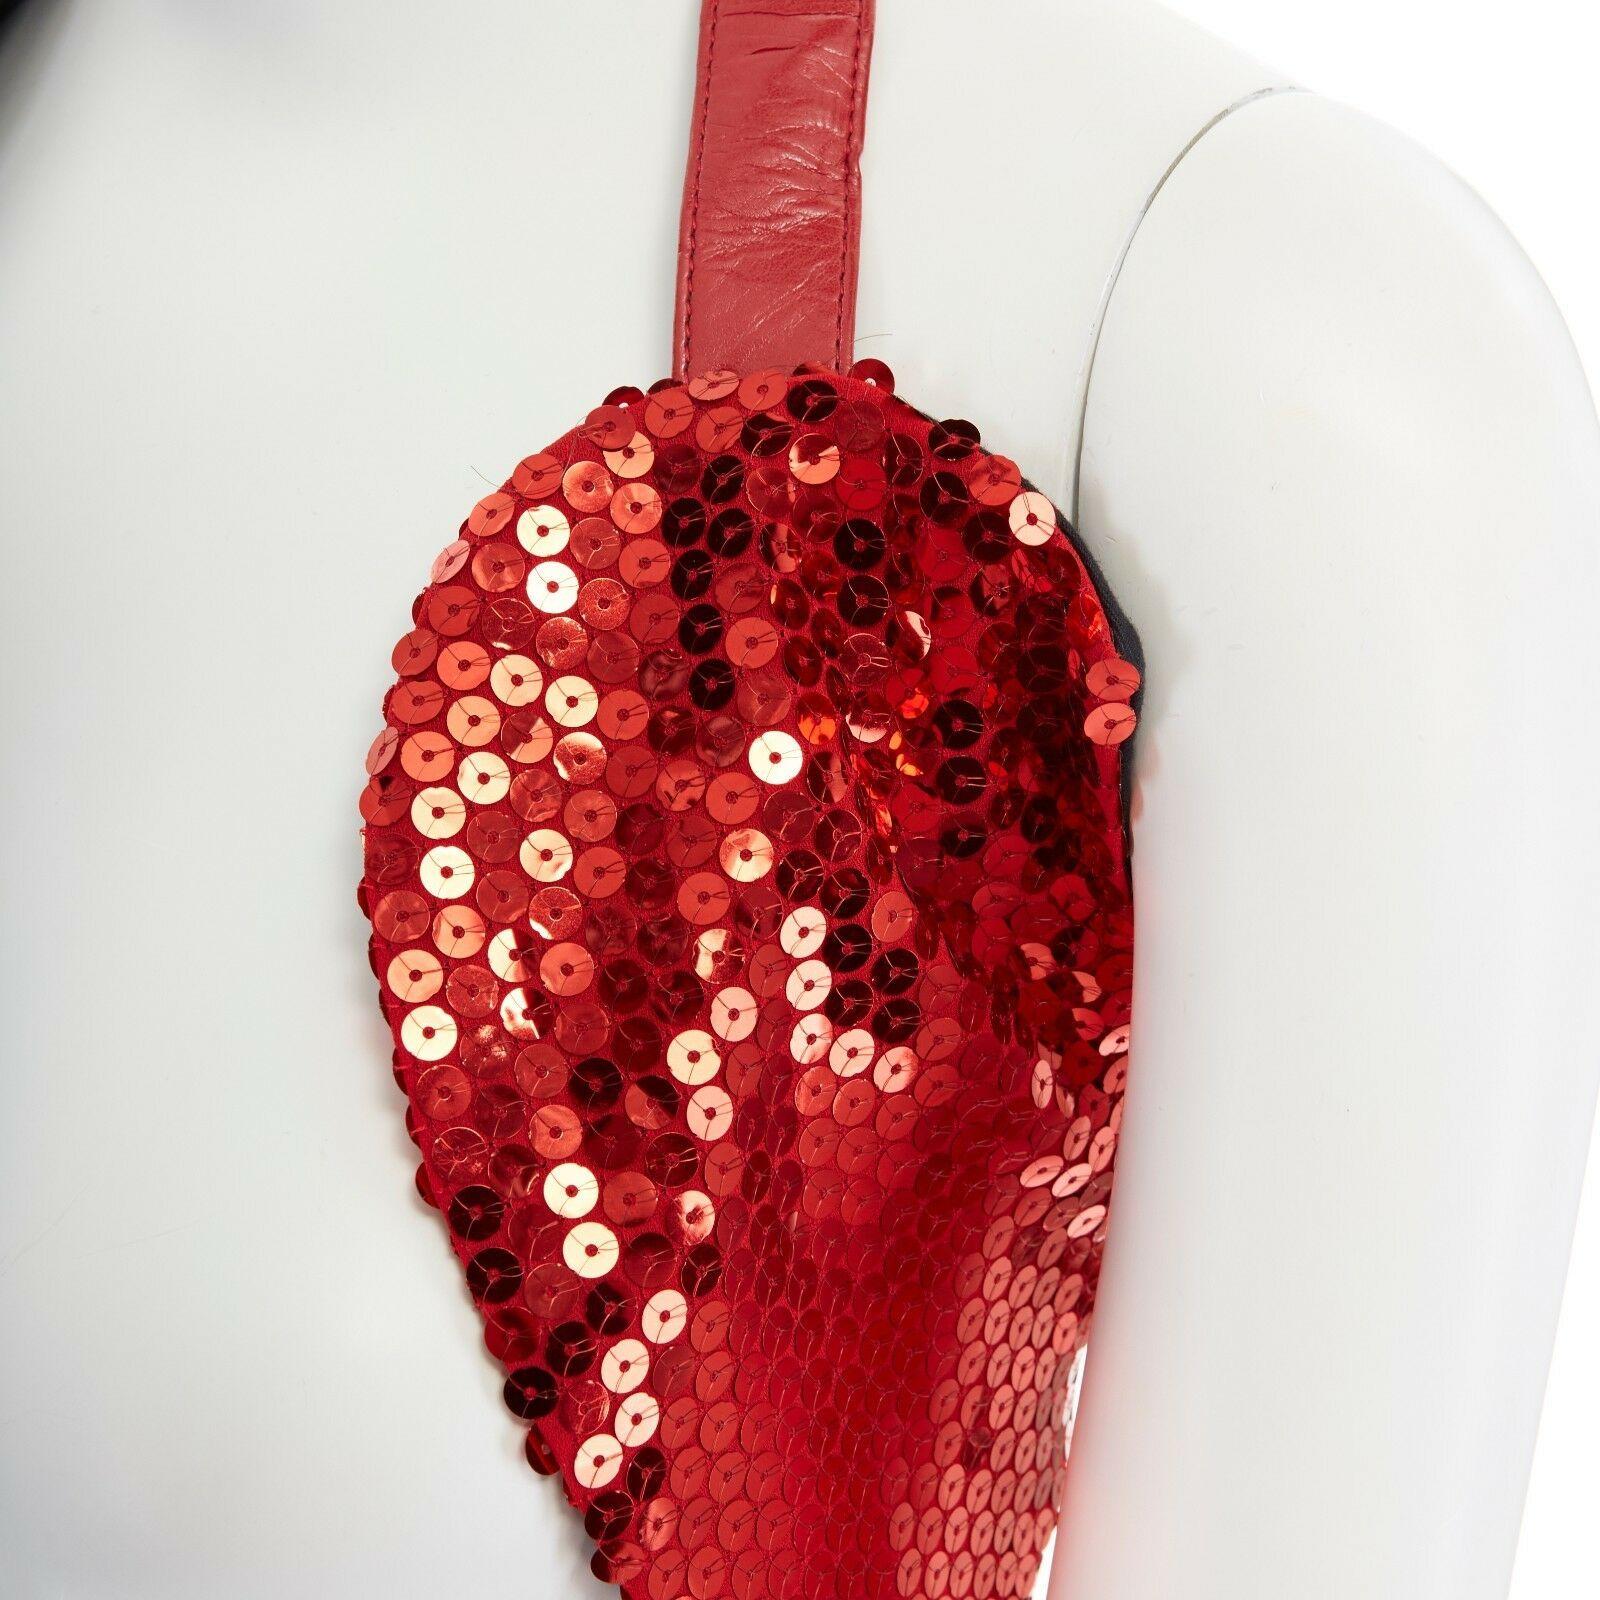 COMME DES GARCONS SS2010 red sequins faux leather dual wrap harness vest top XS

COMME DES GARCONS
FROM THE SPRING SUMMER 2010 COLLECTION
Red sequins embellished. Faux leather wrap-around belt. Silver-tone buckle closure. 
Made in